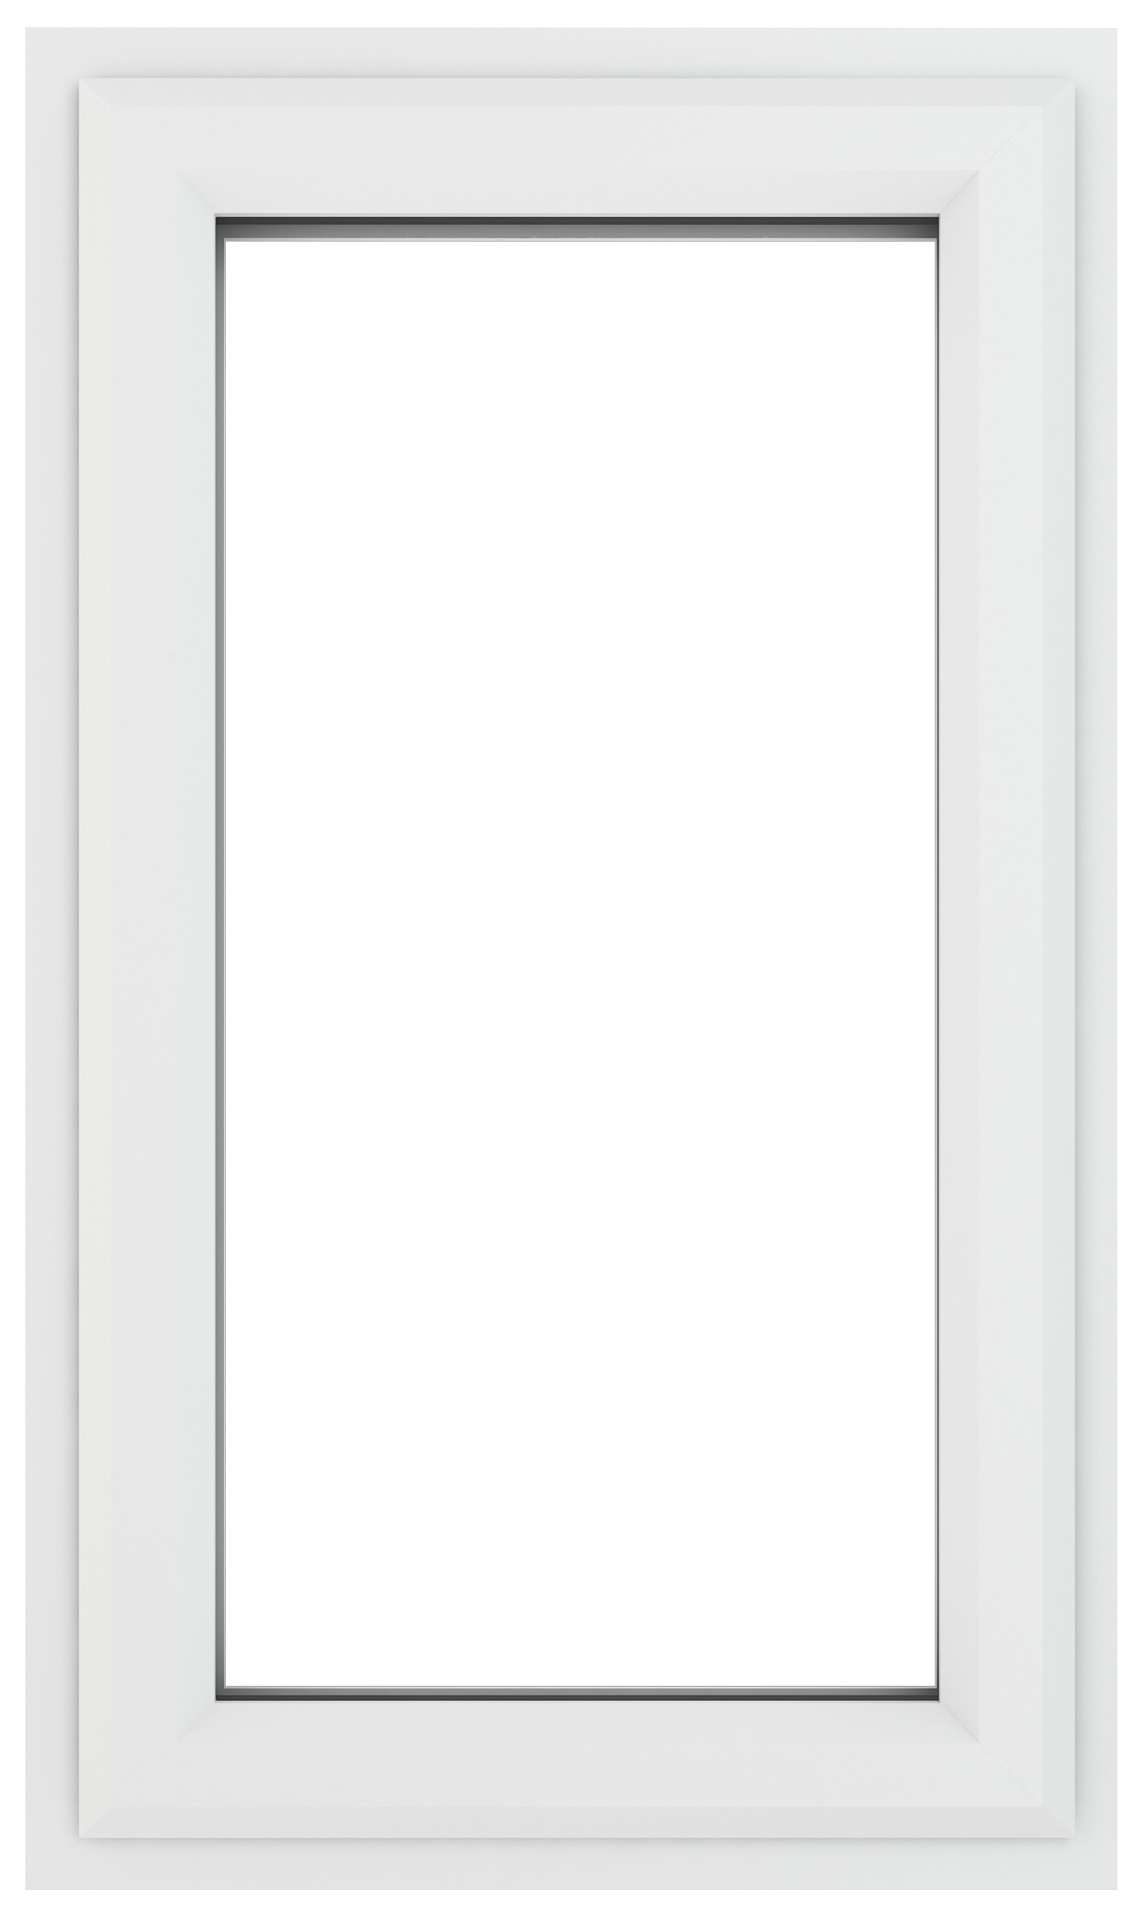 Crystal uPVC White Left Hung Clear Double Glazed Window - 610 x 1190mm